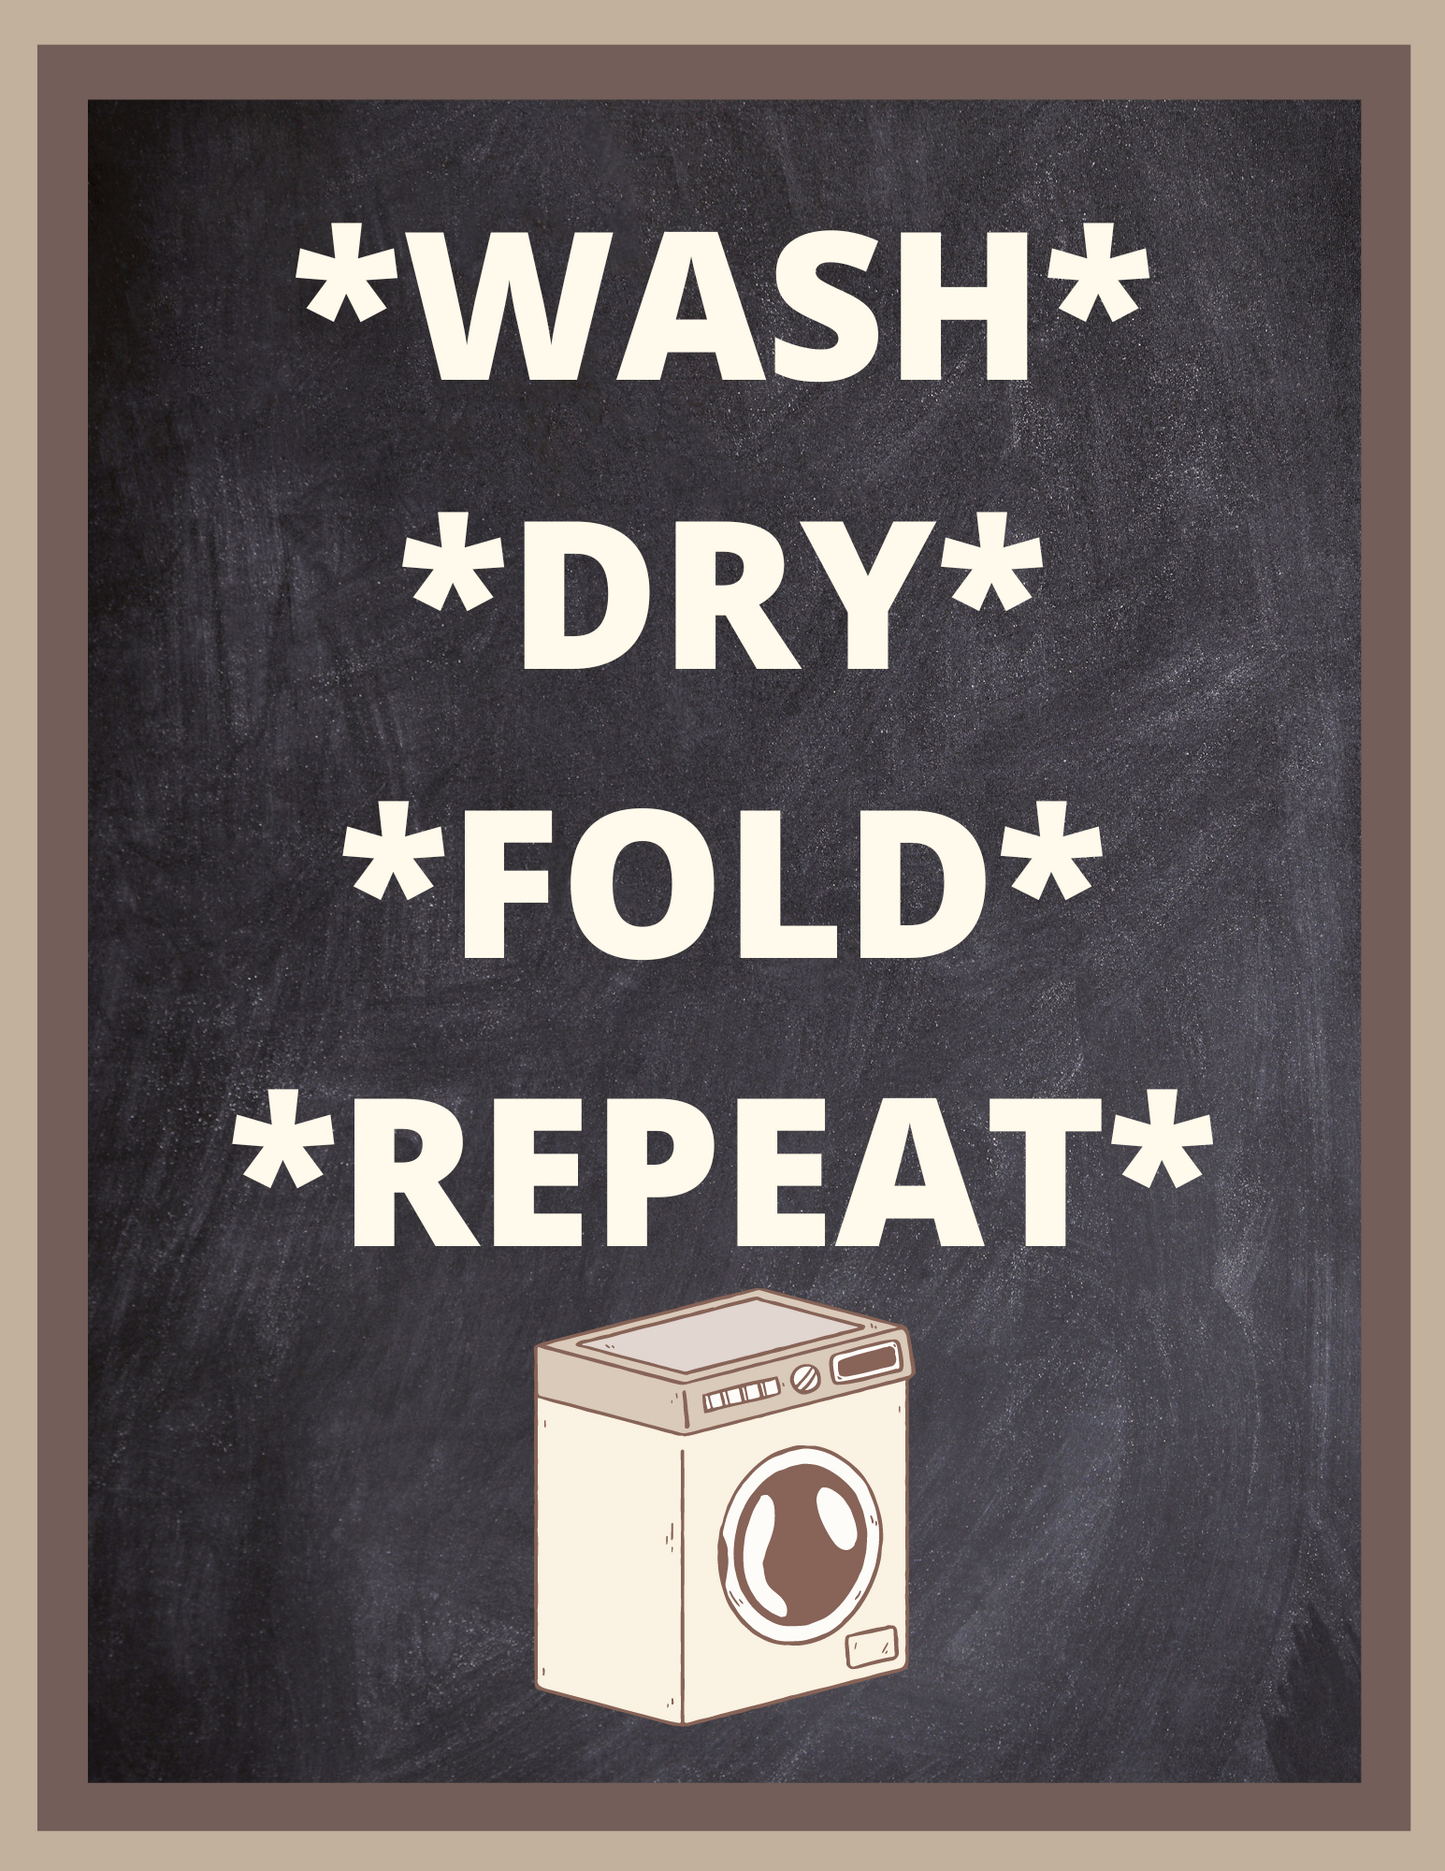 Printable Laundry Room Sign - "Wash" "Dry" "Fold" "Repeat"